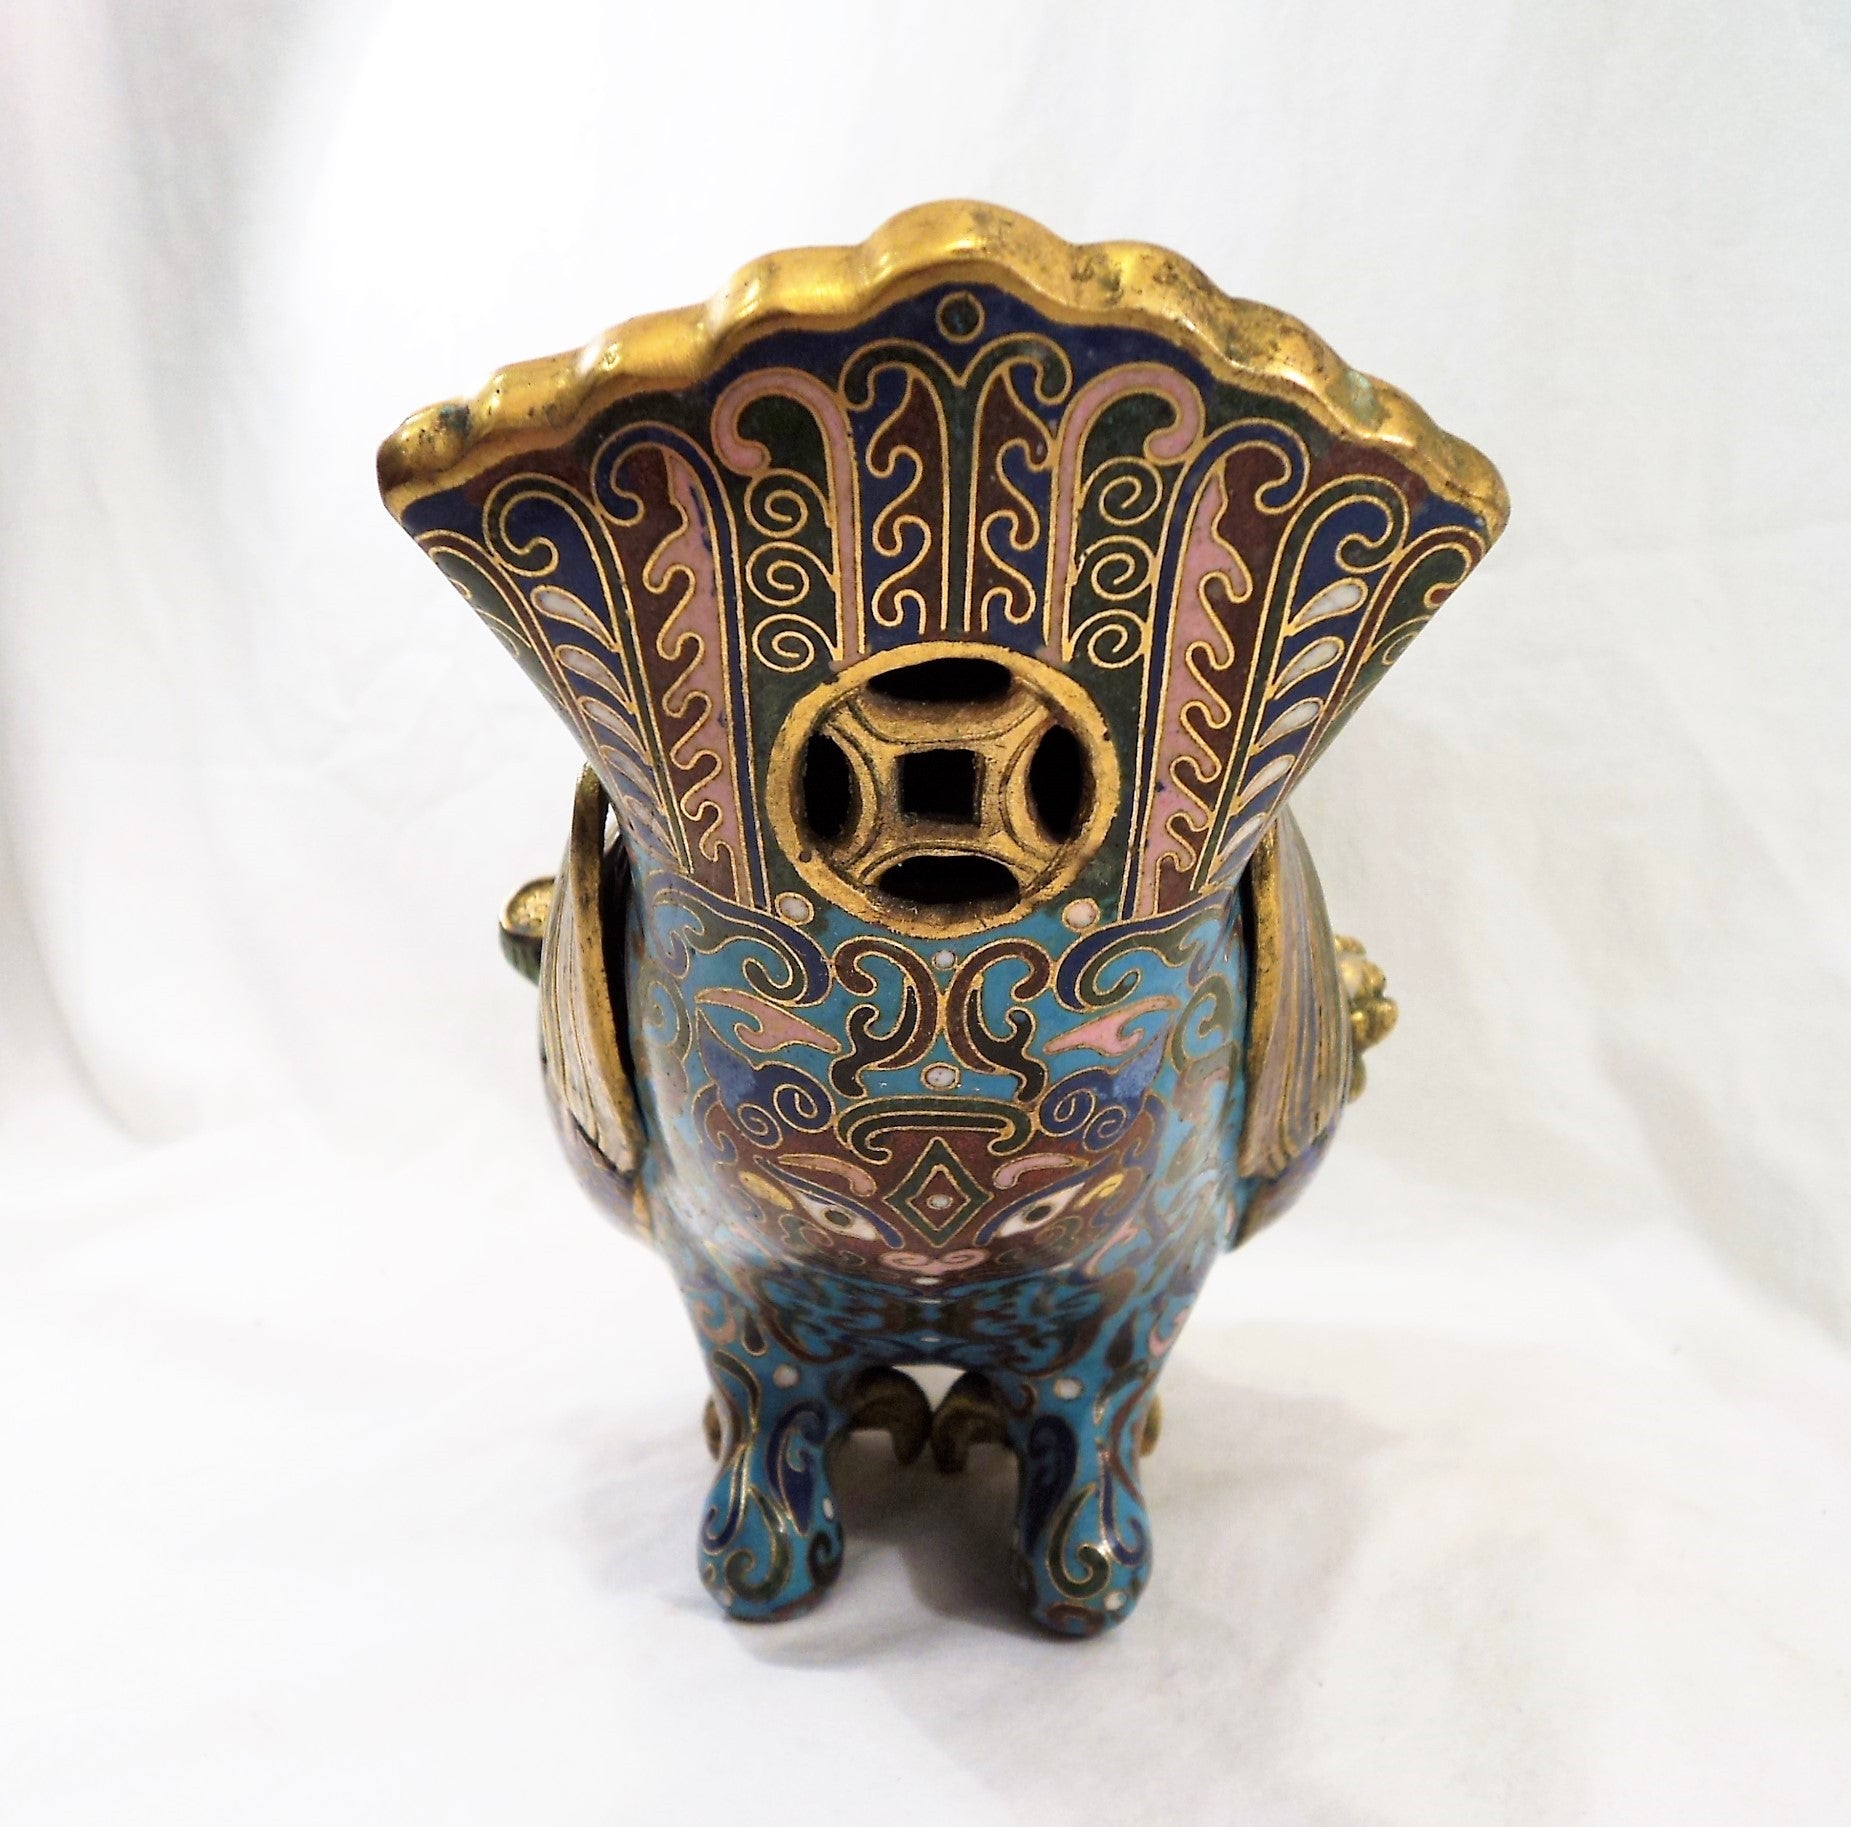 Antique Chinese Cloisonne and Brass Censer Duck Pair